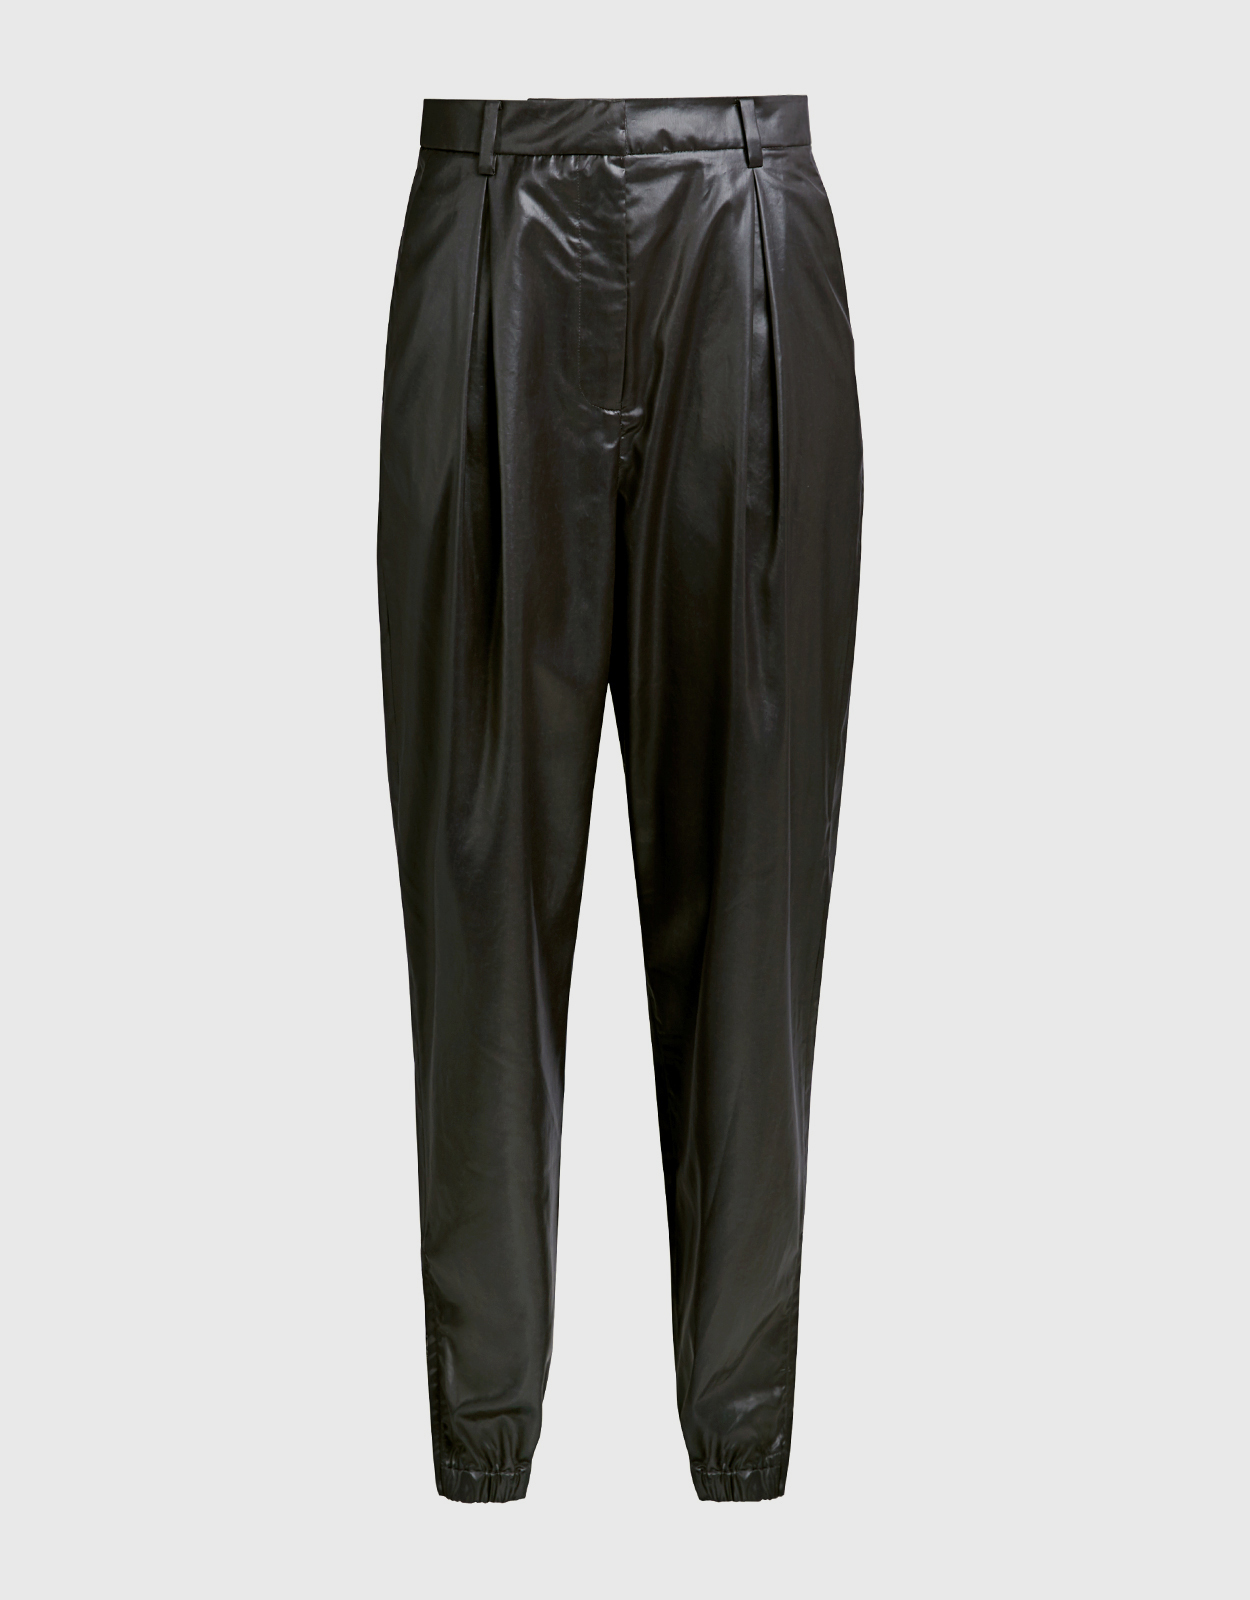 Tibi Pleated Faux Leather Tapered Pants (Pants,Straight Leg